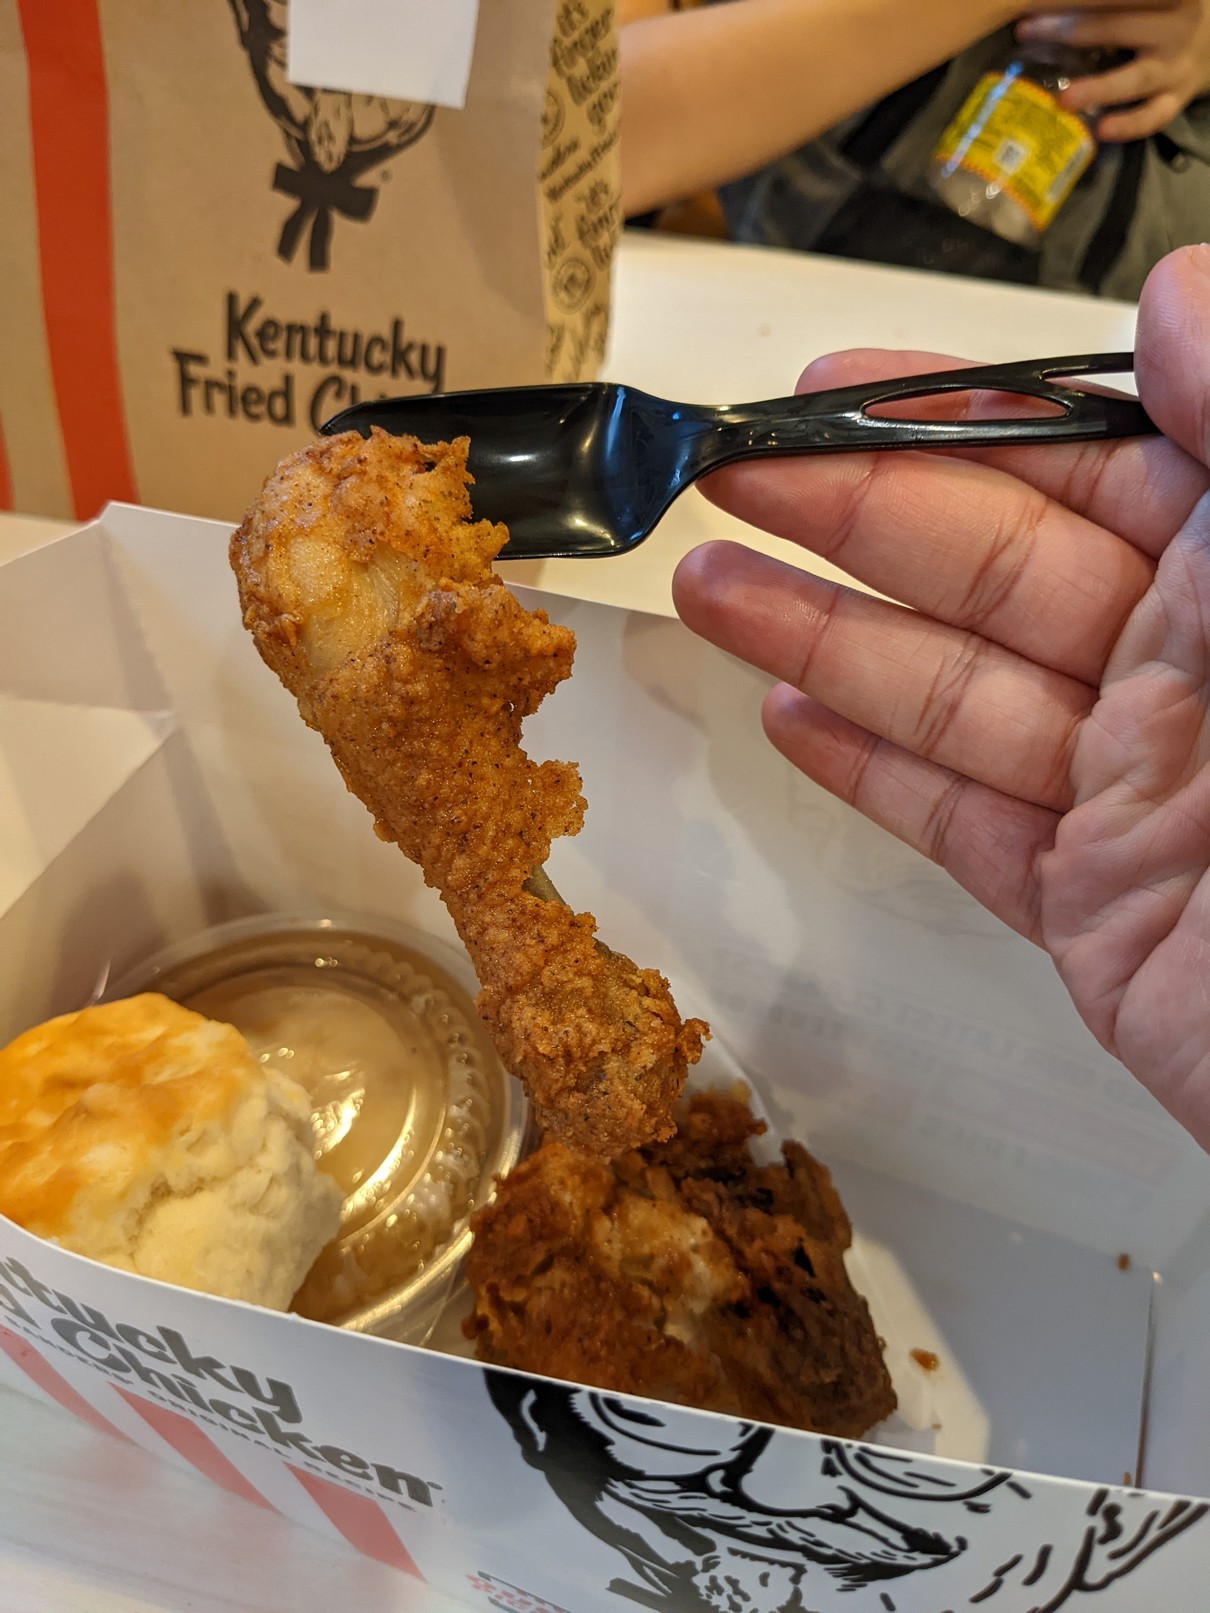 A highlight of the KFC drumstick.